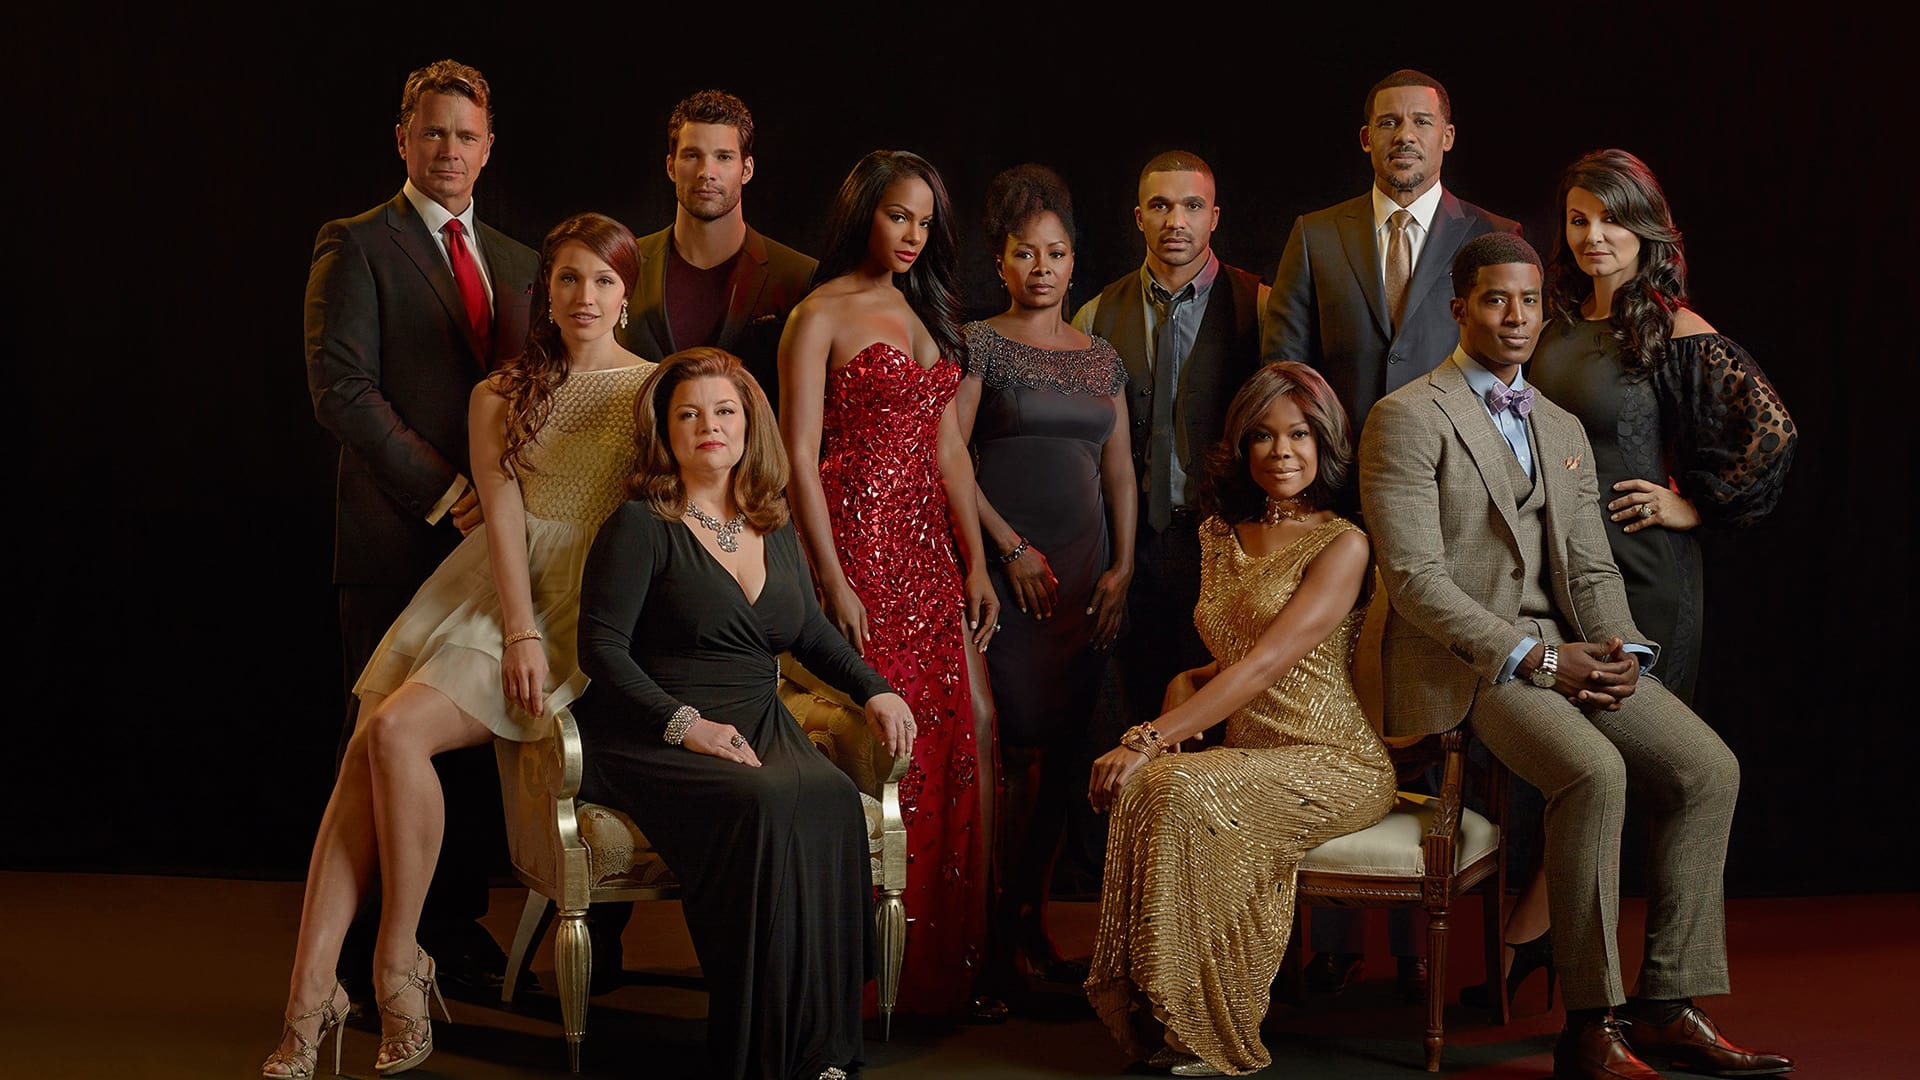 Tyler Perry's The Haves and the Have Nots - Season 8 Episode 17